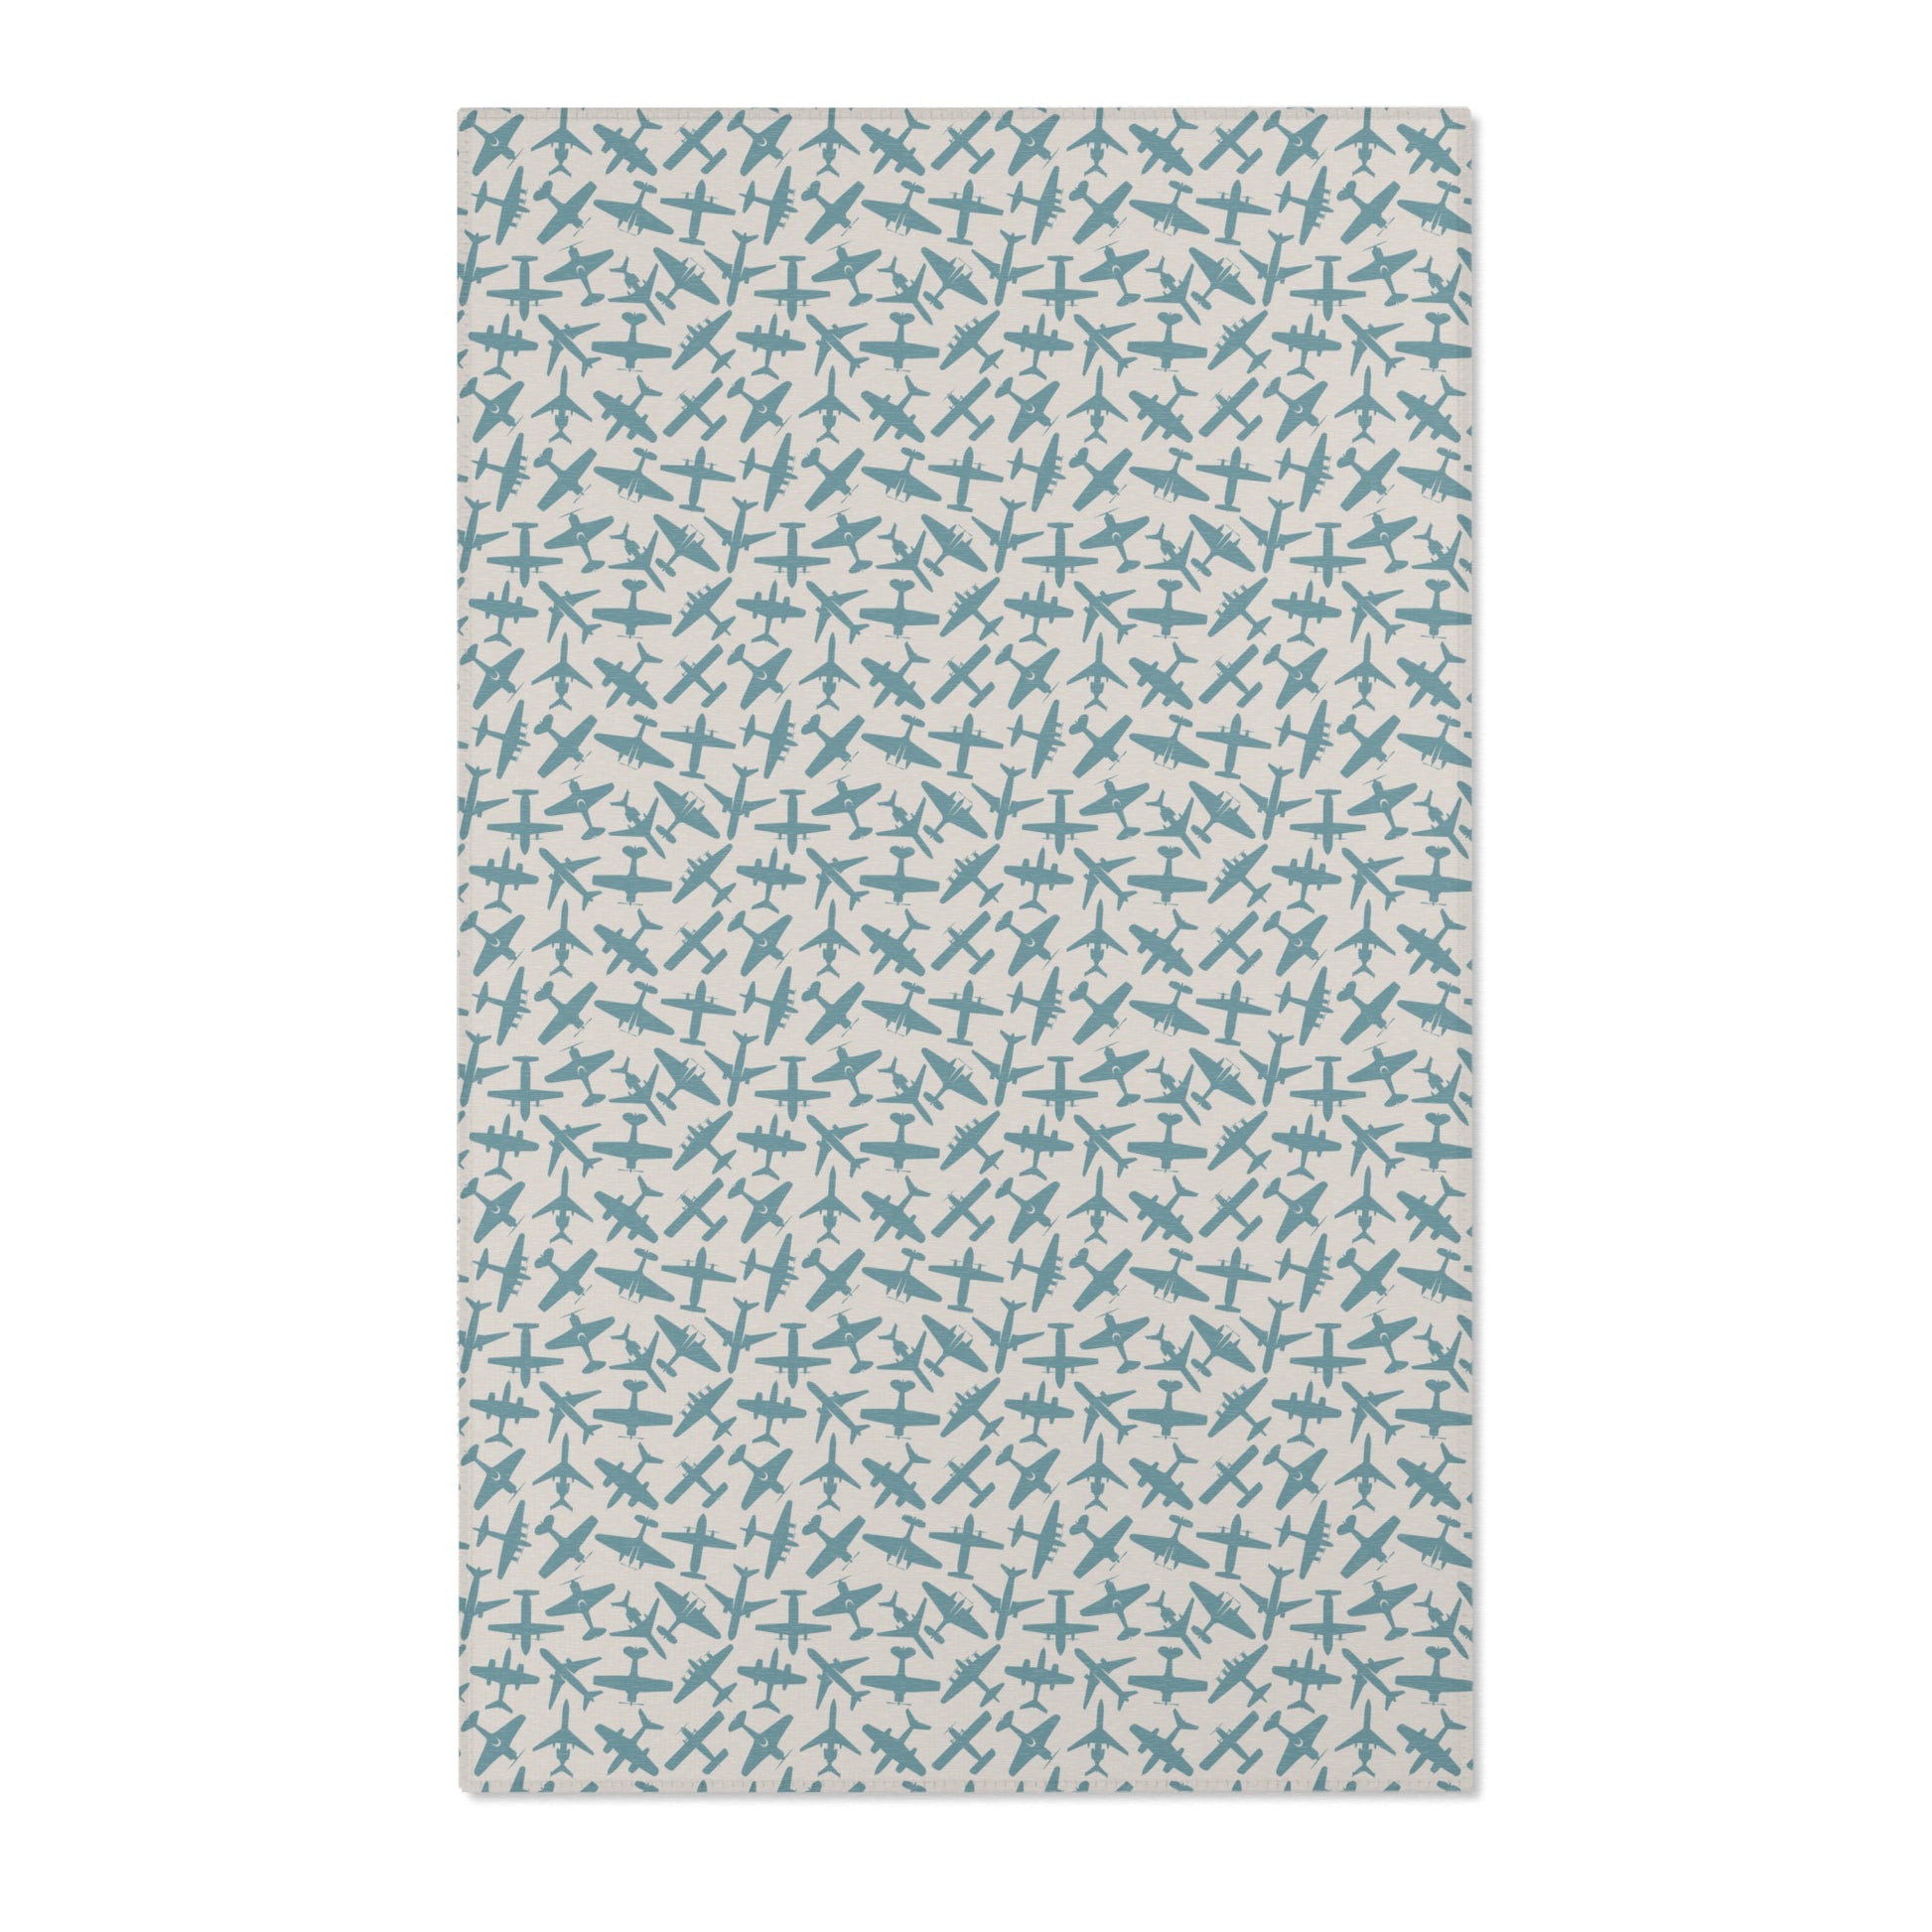 aviation merchandise, airplane patterned aviation area rug 1